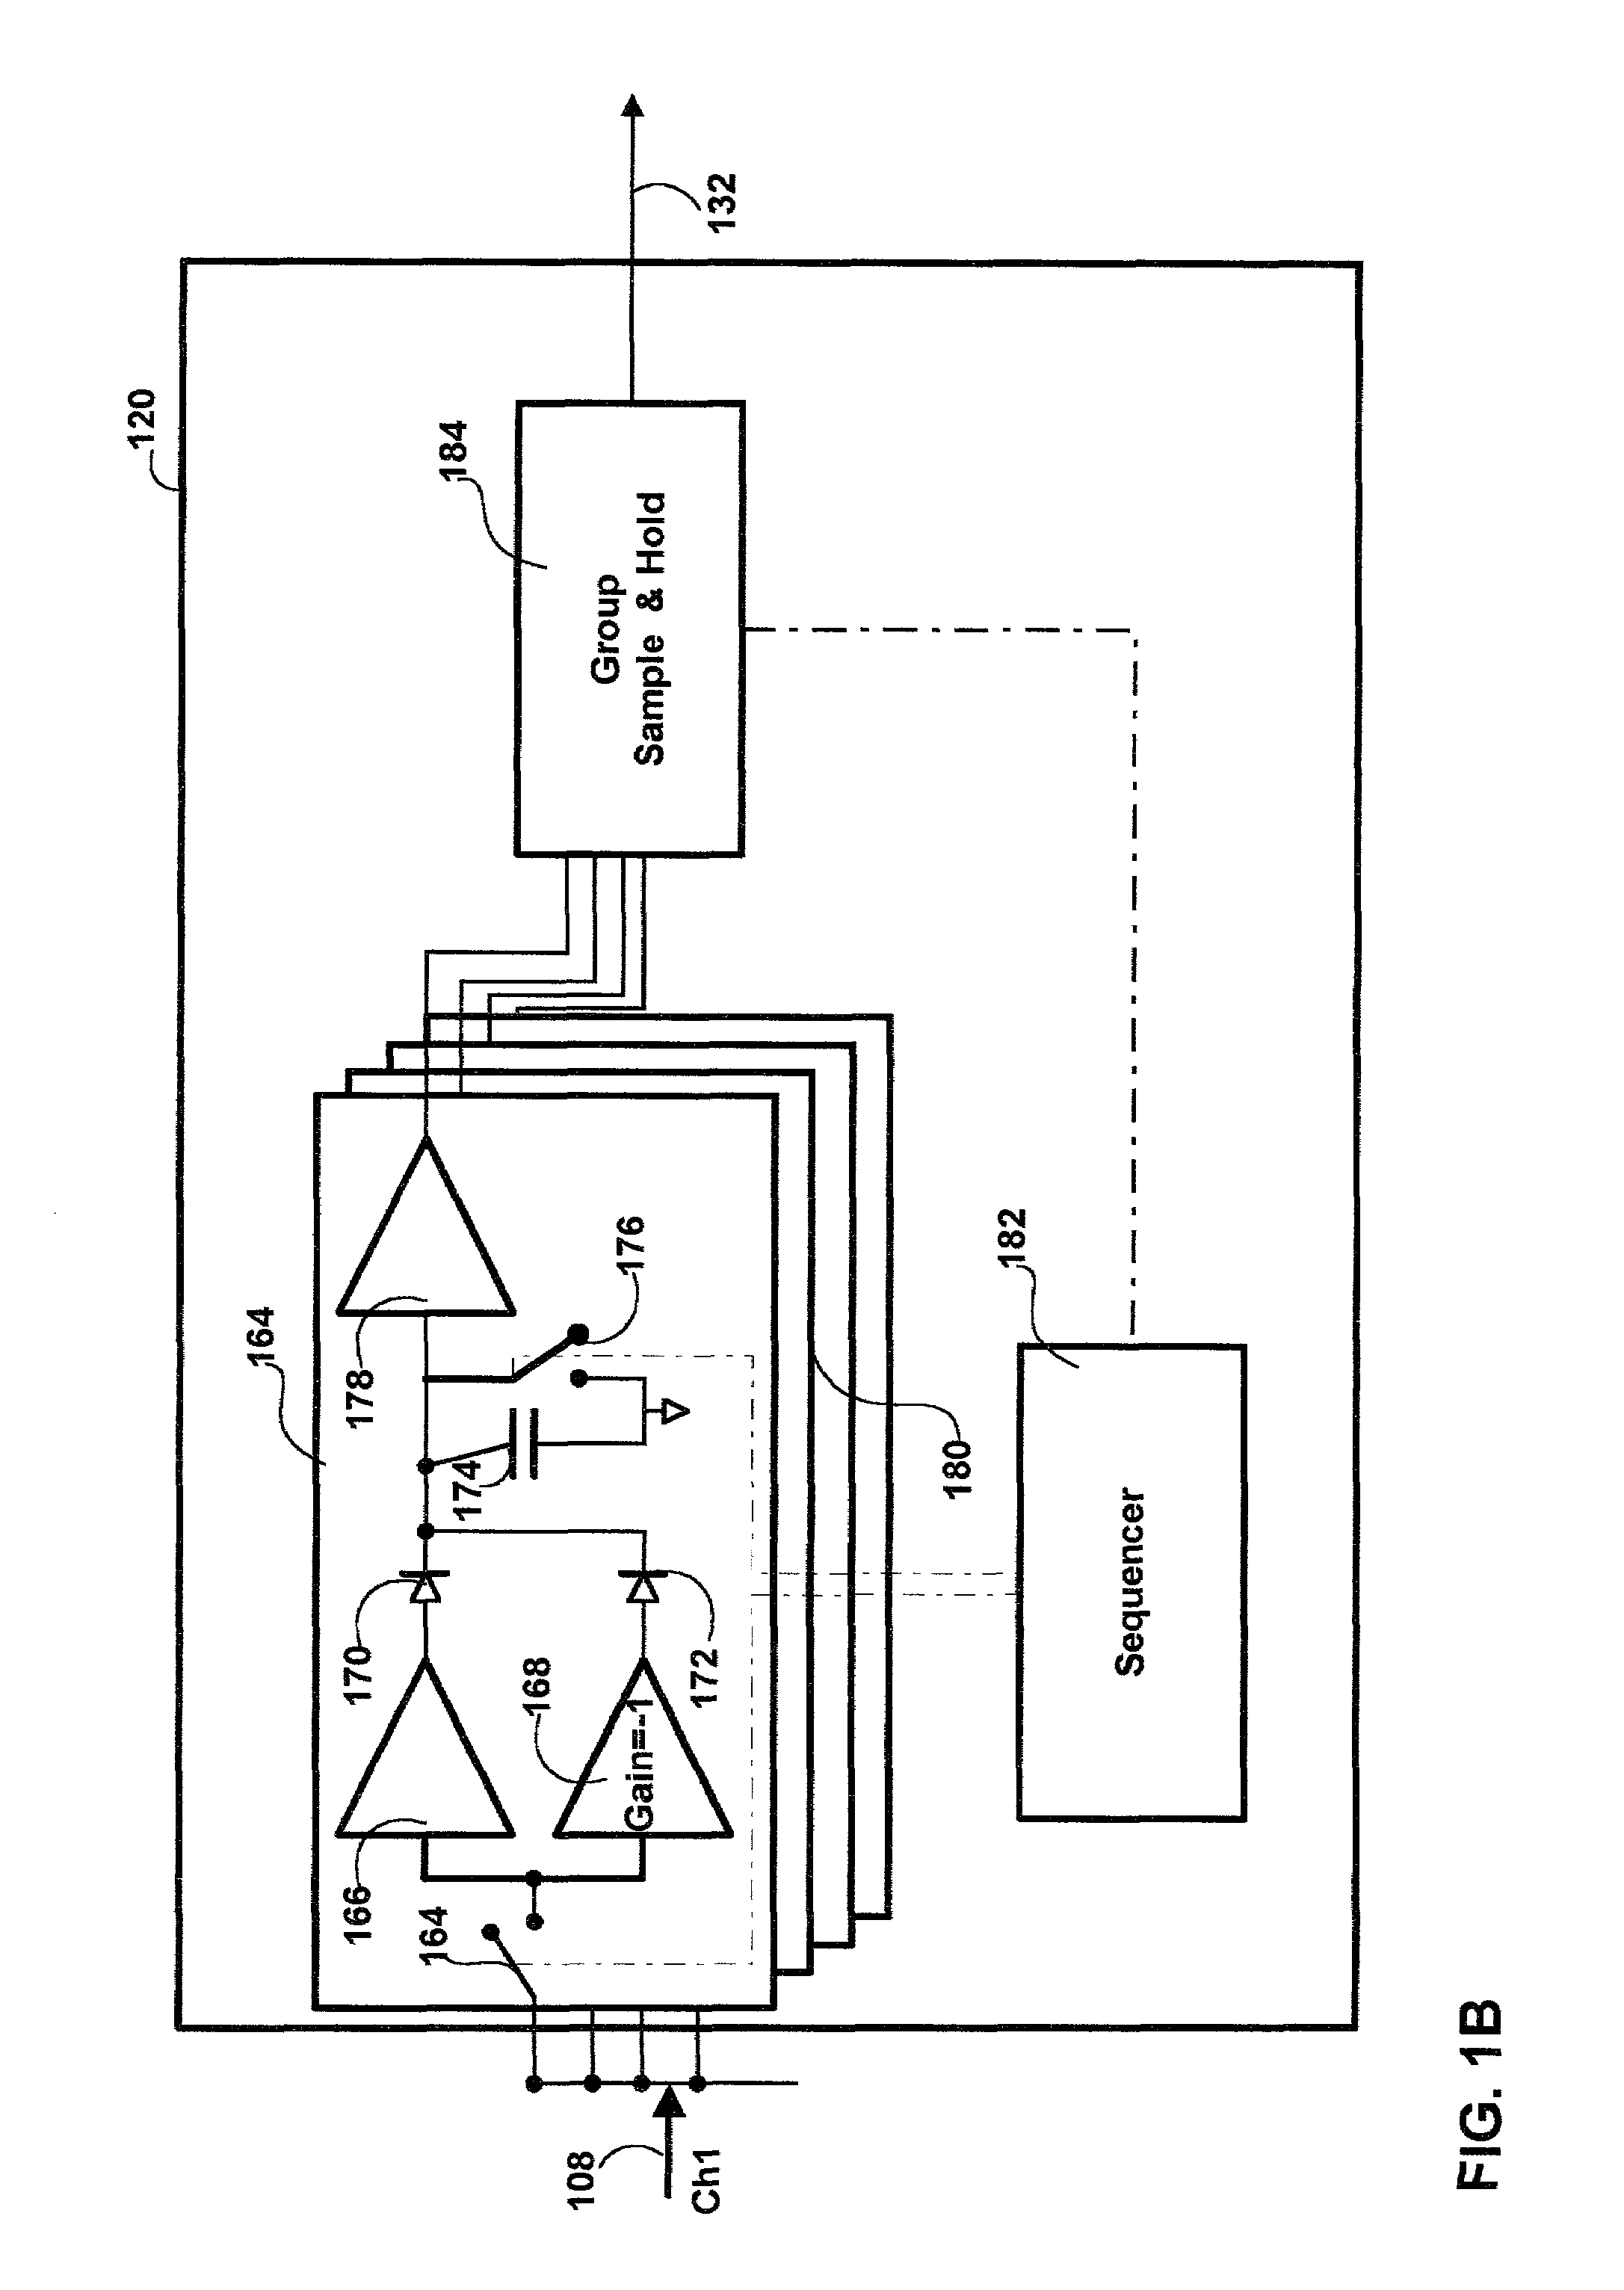 Method and apparatus for a high efficiency line driver